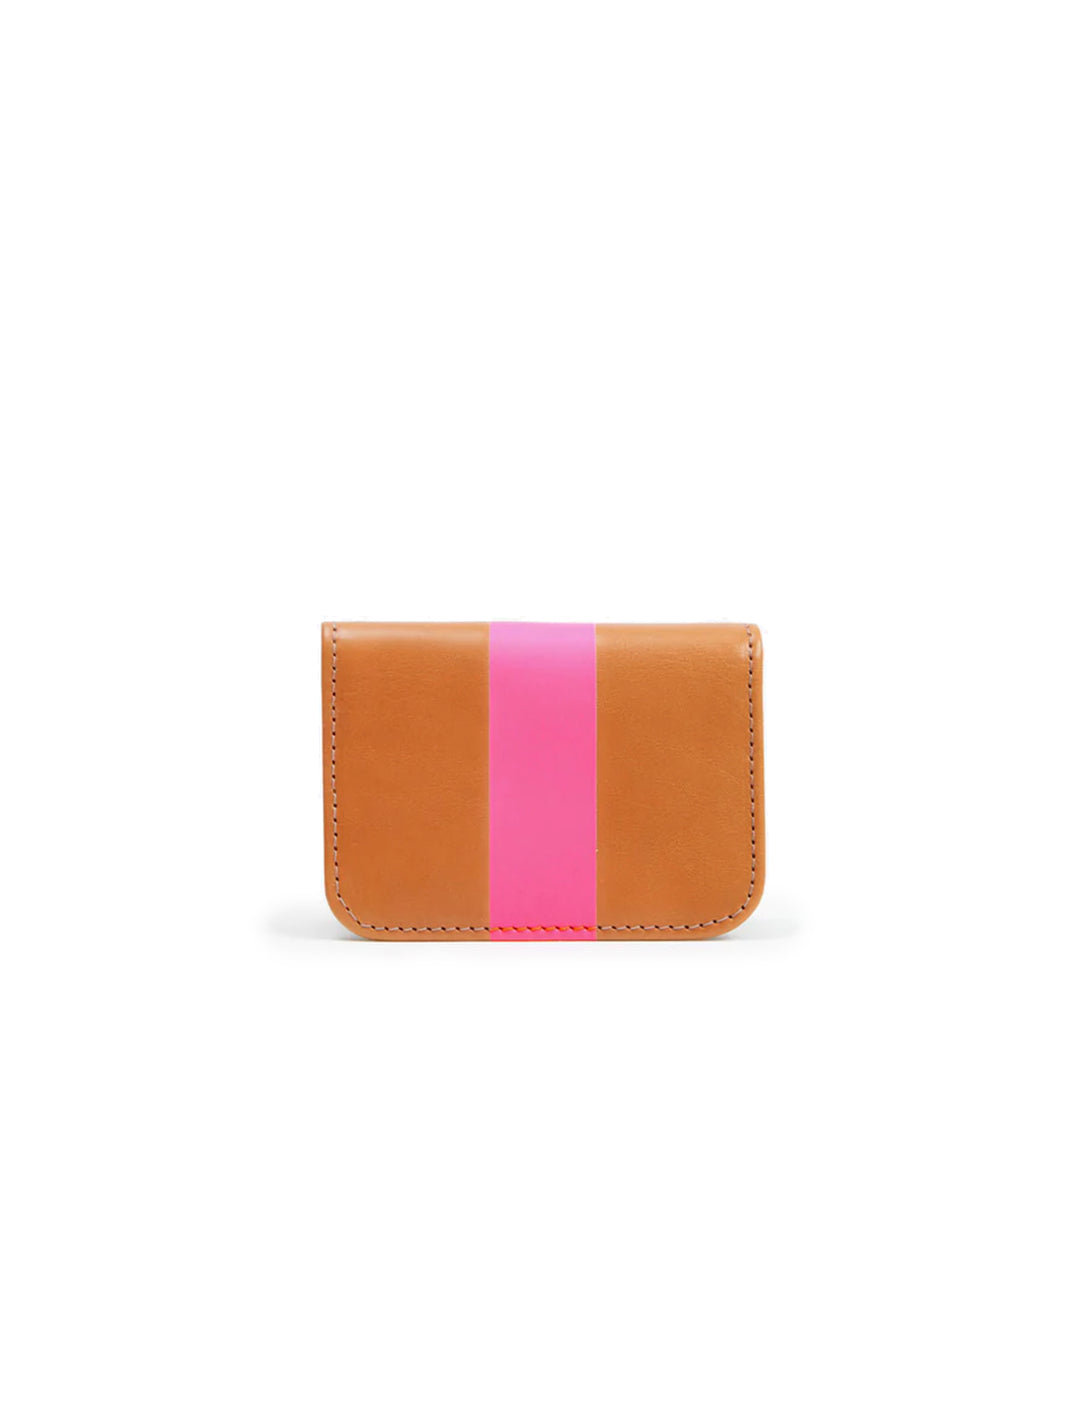 card case in natural rustic and neon stripe